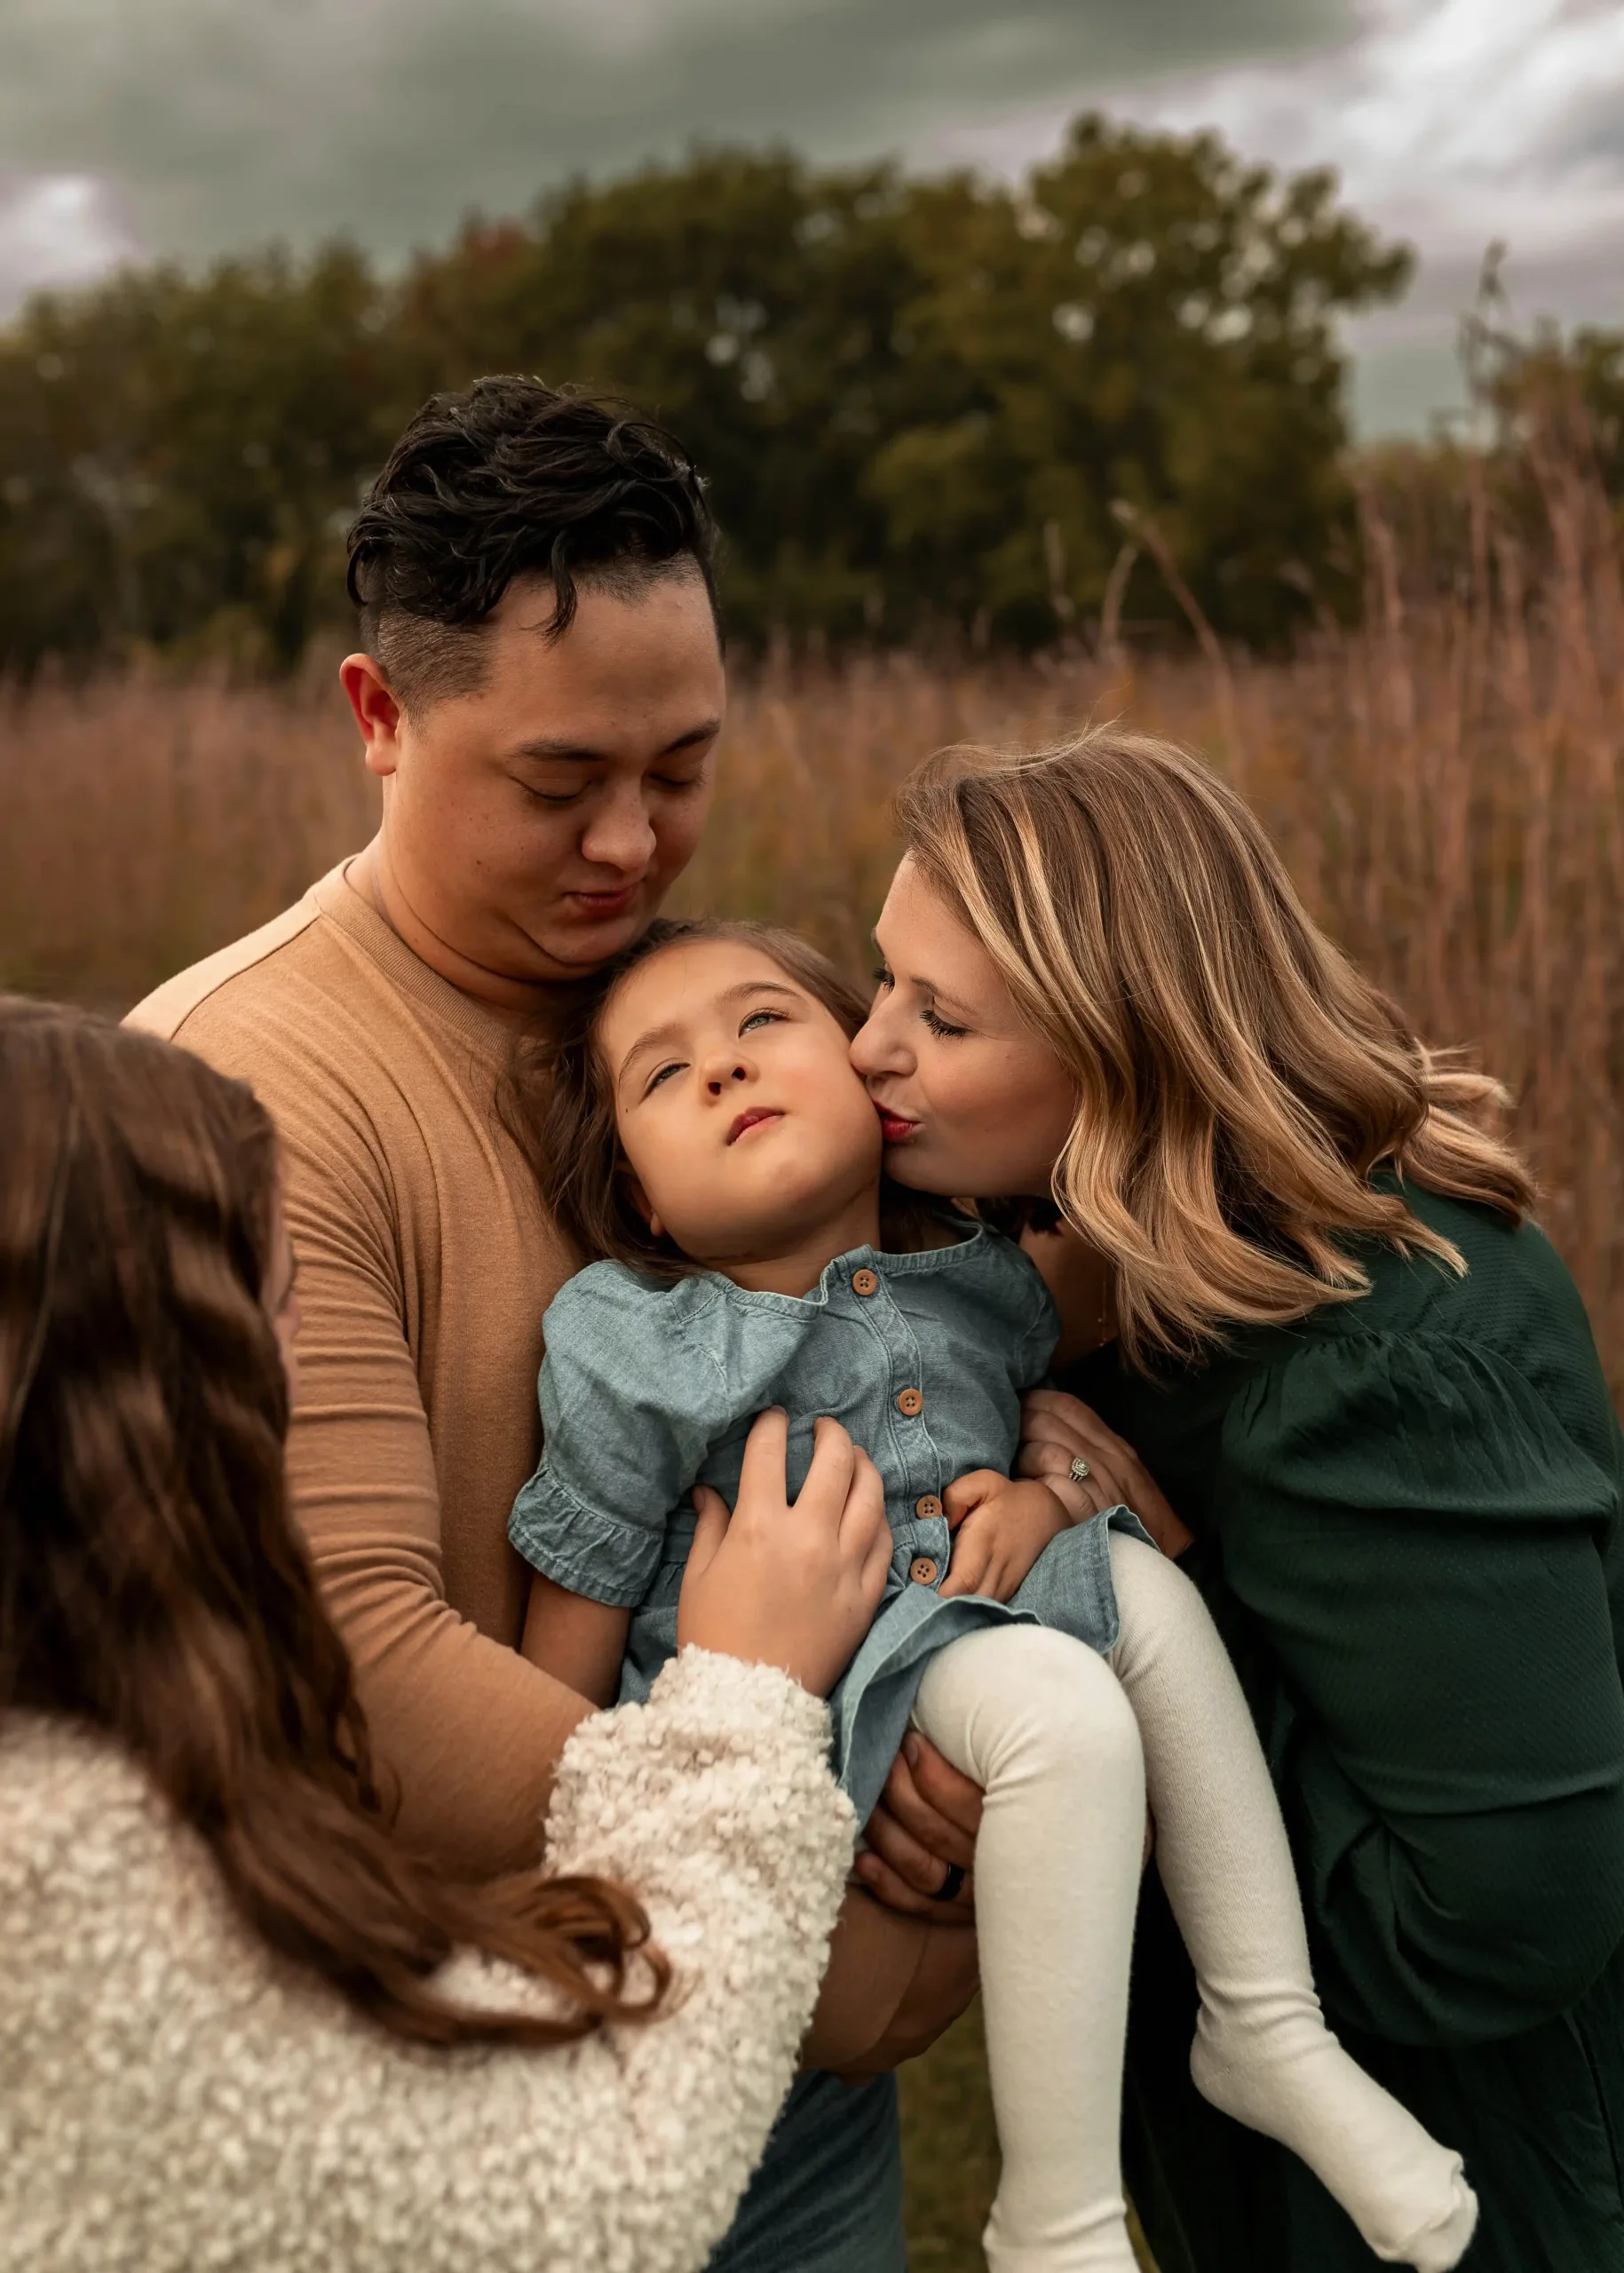 Hanna the baby suffering from epilepsy called Lennox Gastaut Syndrome a severe condition that causes repeated seizures and developmental delays. with her family.